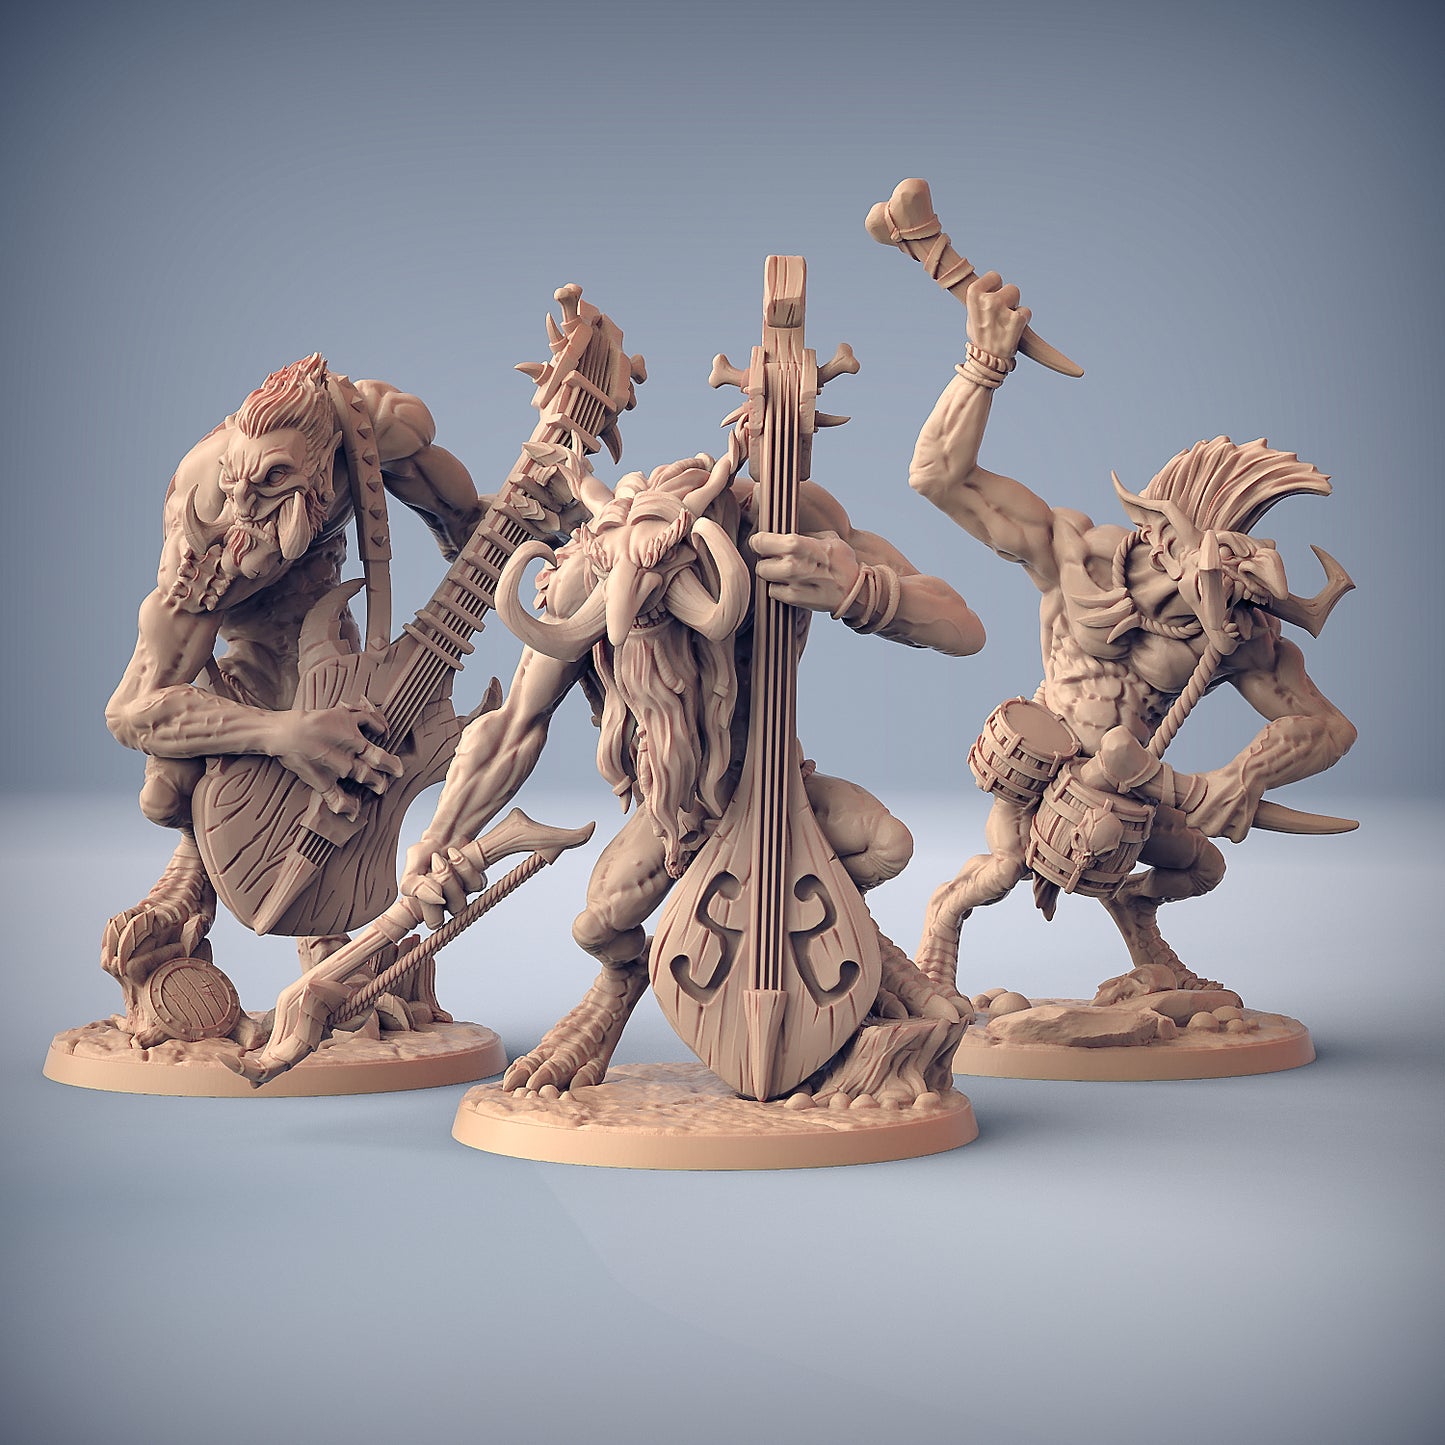 The Three Trolls from Artisan Guild